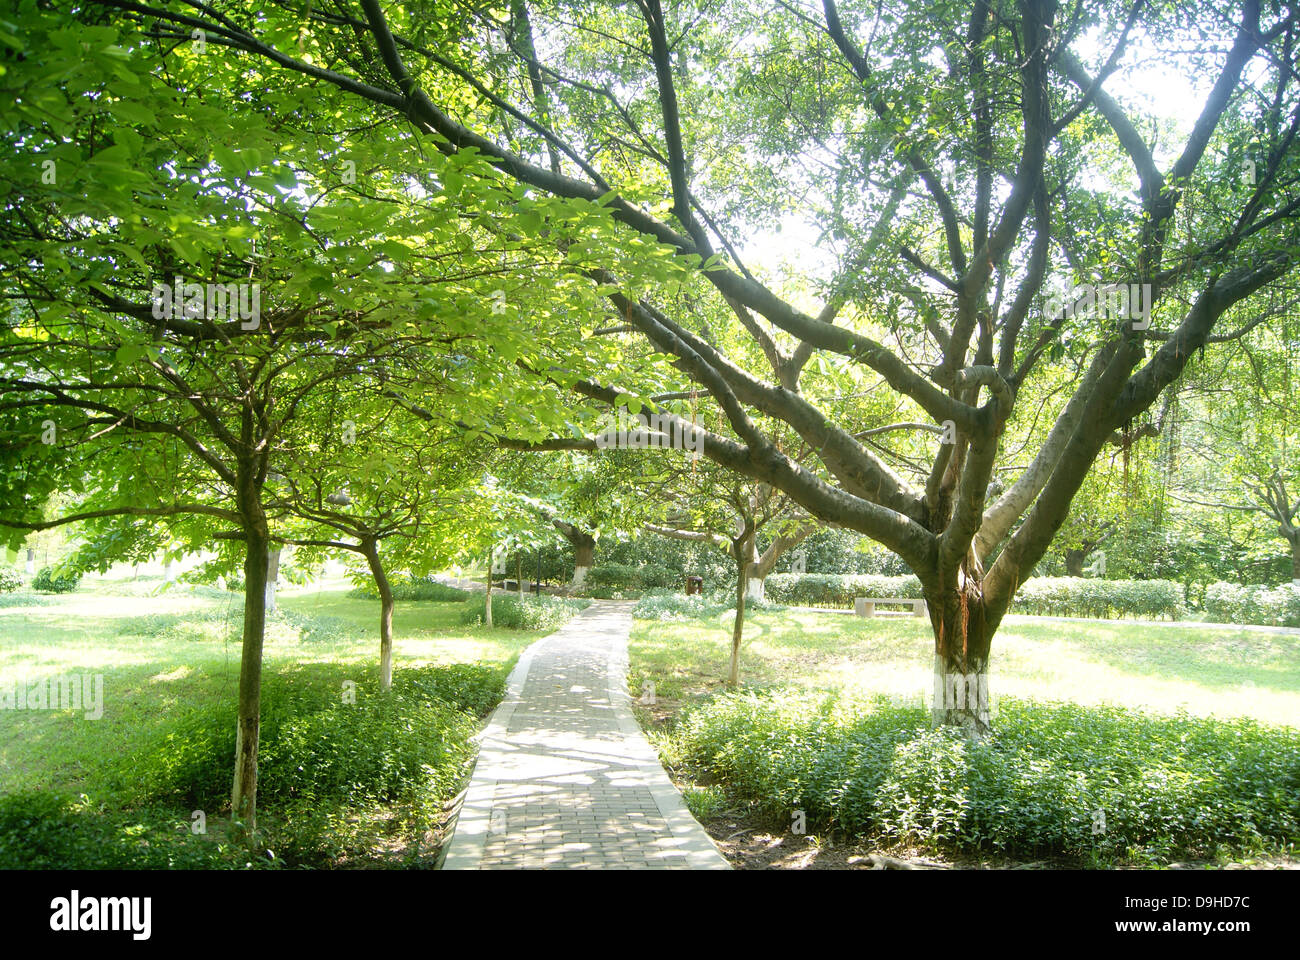 Green trees and tree-lined roads, ganoderma park in shenzhen, China. Stock Photo